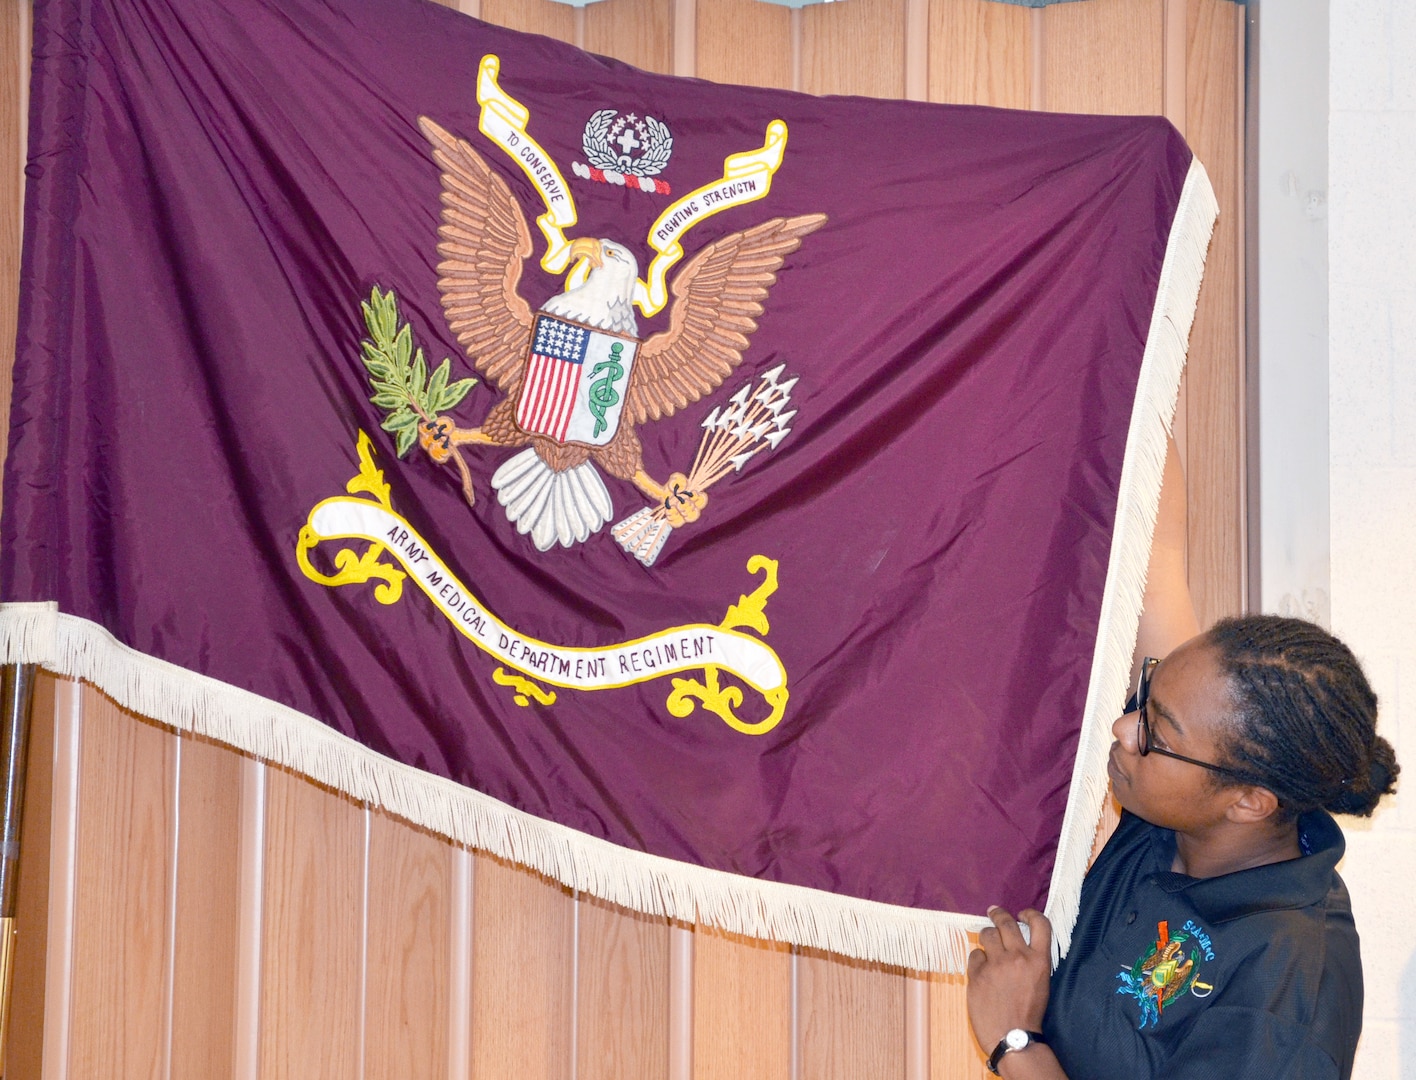 Sgt. Audie Murphy Club member Sgt. 1st Class Tiffany Skelton holds up the Army Medical Department Regimental Flag as the keynote speaker at the 27th anniversary celebration describes what each symbol represents. (Photo by Esther Garcia, U.S. Army Medical Department Center and School Public Affairs) 